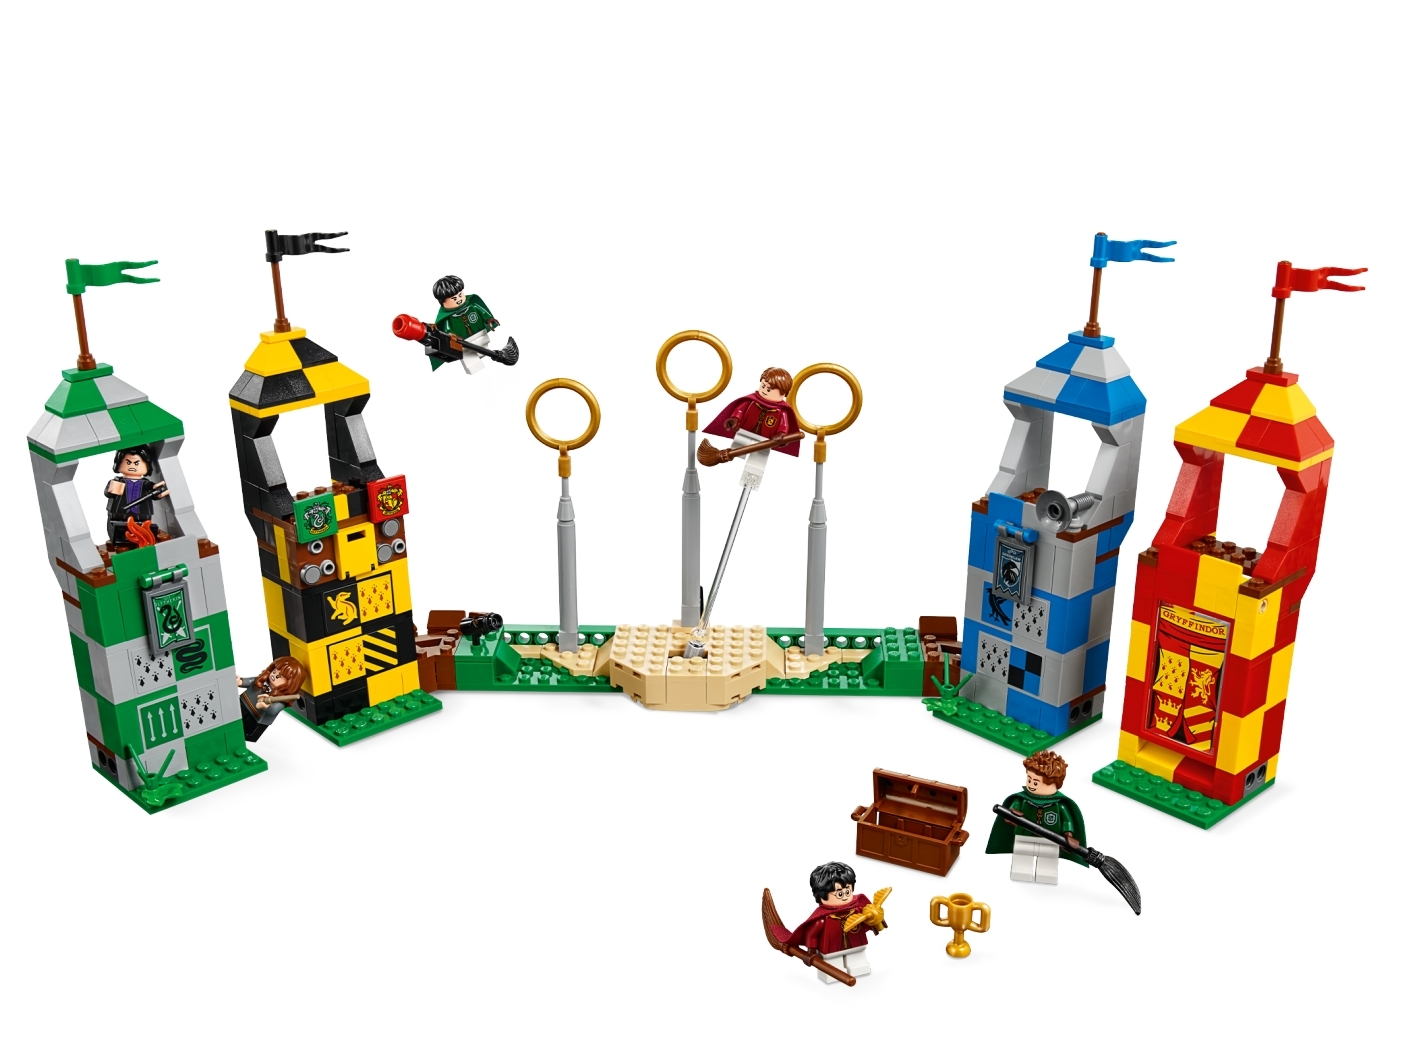 Details about   Replacement Parts for LEGO Harry Potter 75956 Quidditch Match You Pick Parts 